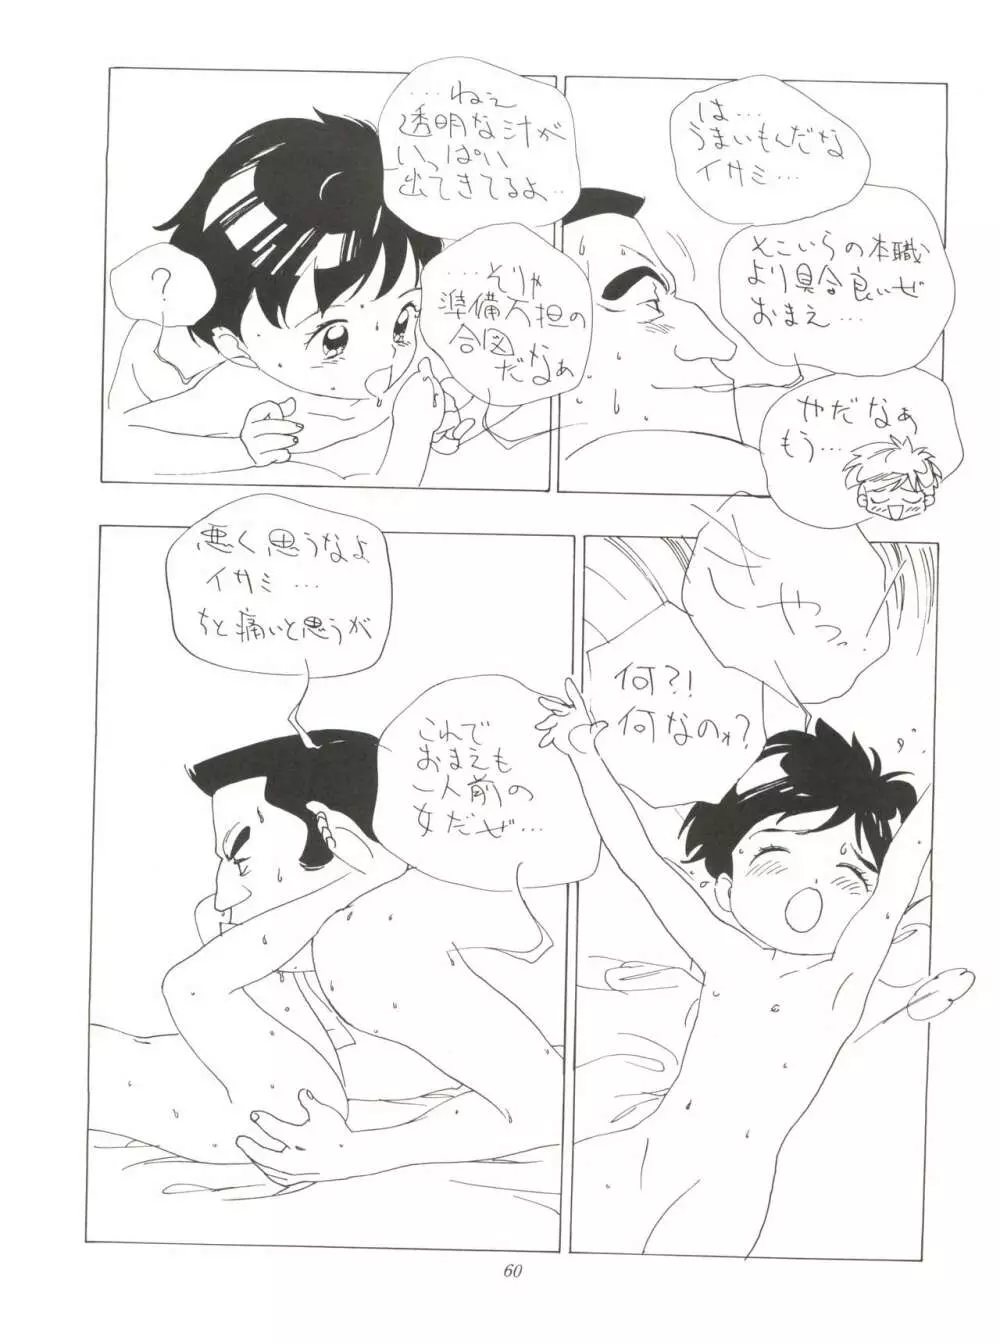 FLY! ISAMI!! - page64